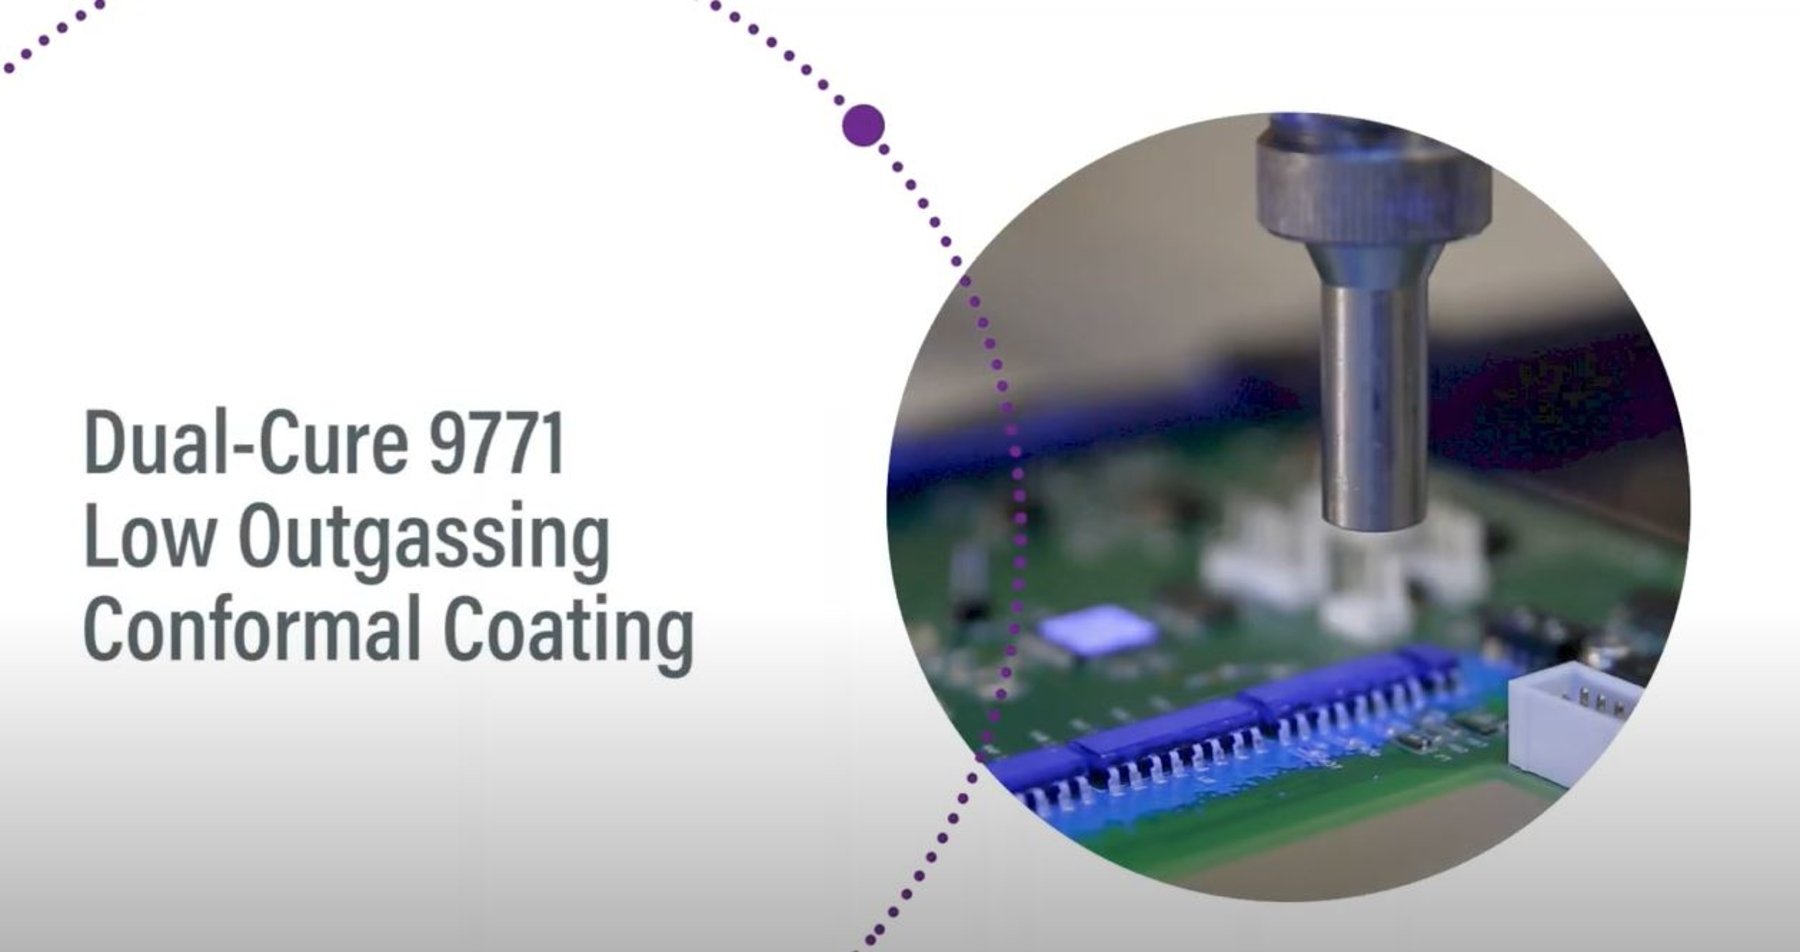 Dual-Cure 9771 Low Outgassing Conformal Coating